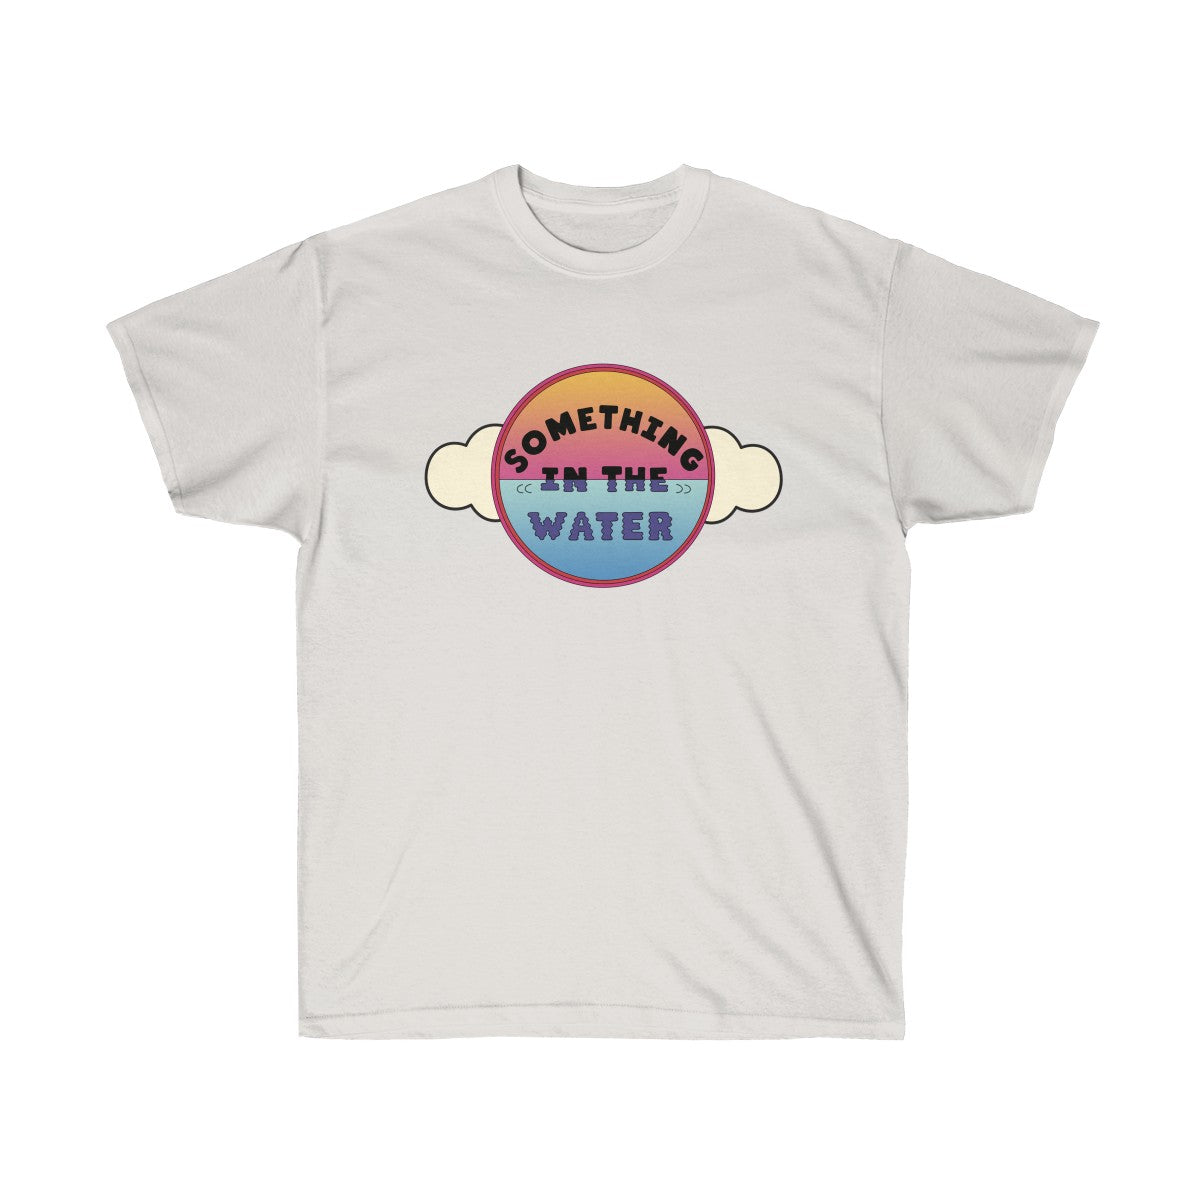 Something in the water Unisex Ultra Cotton Tee - Pharrell Williams festival inspired-Ash Grey-S-Archethype